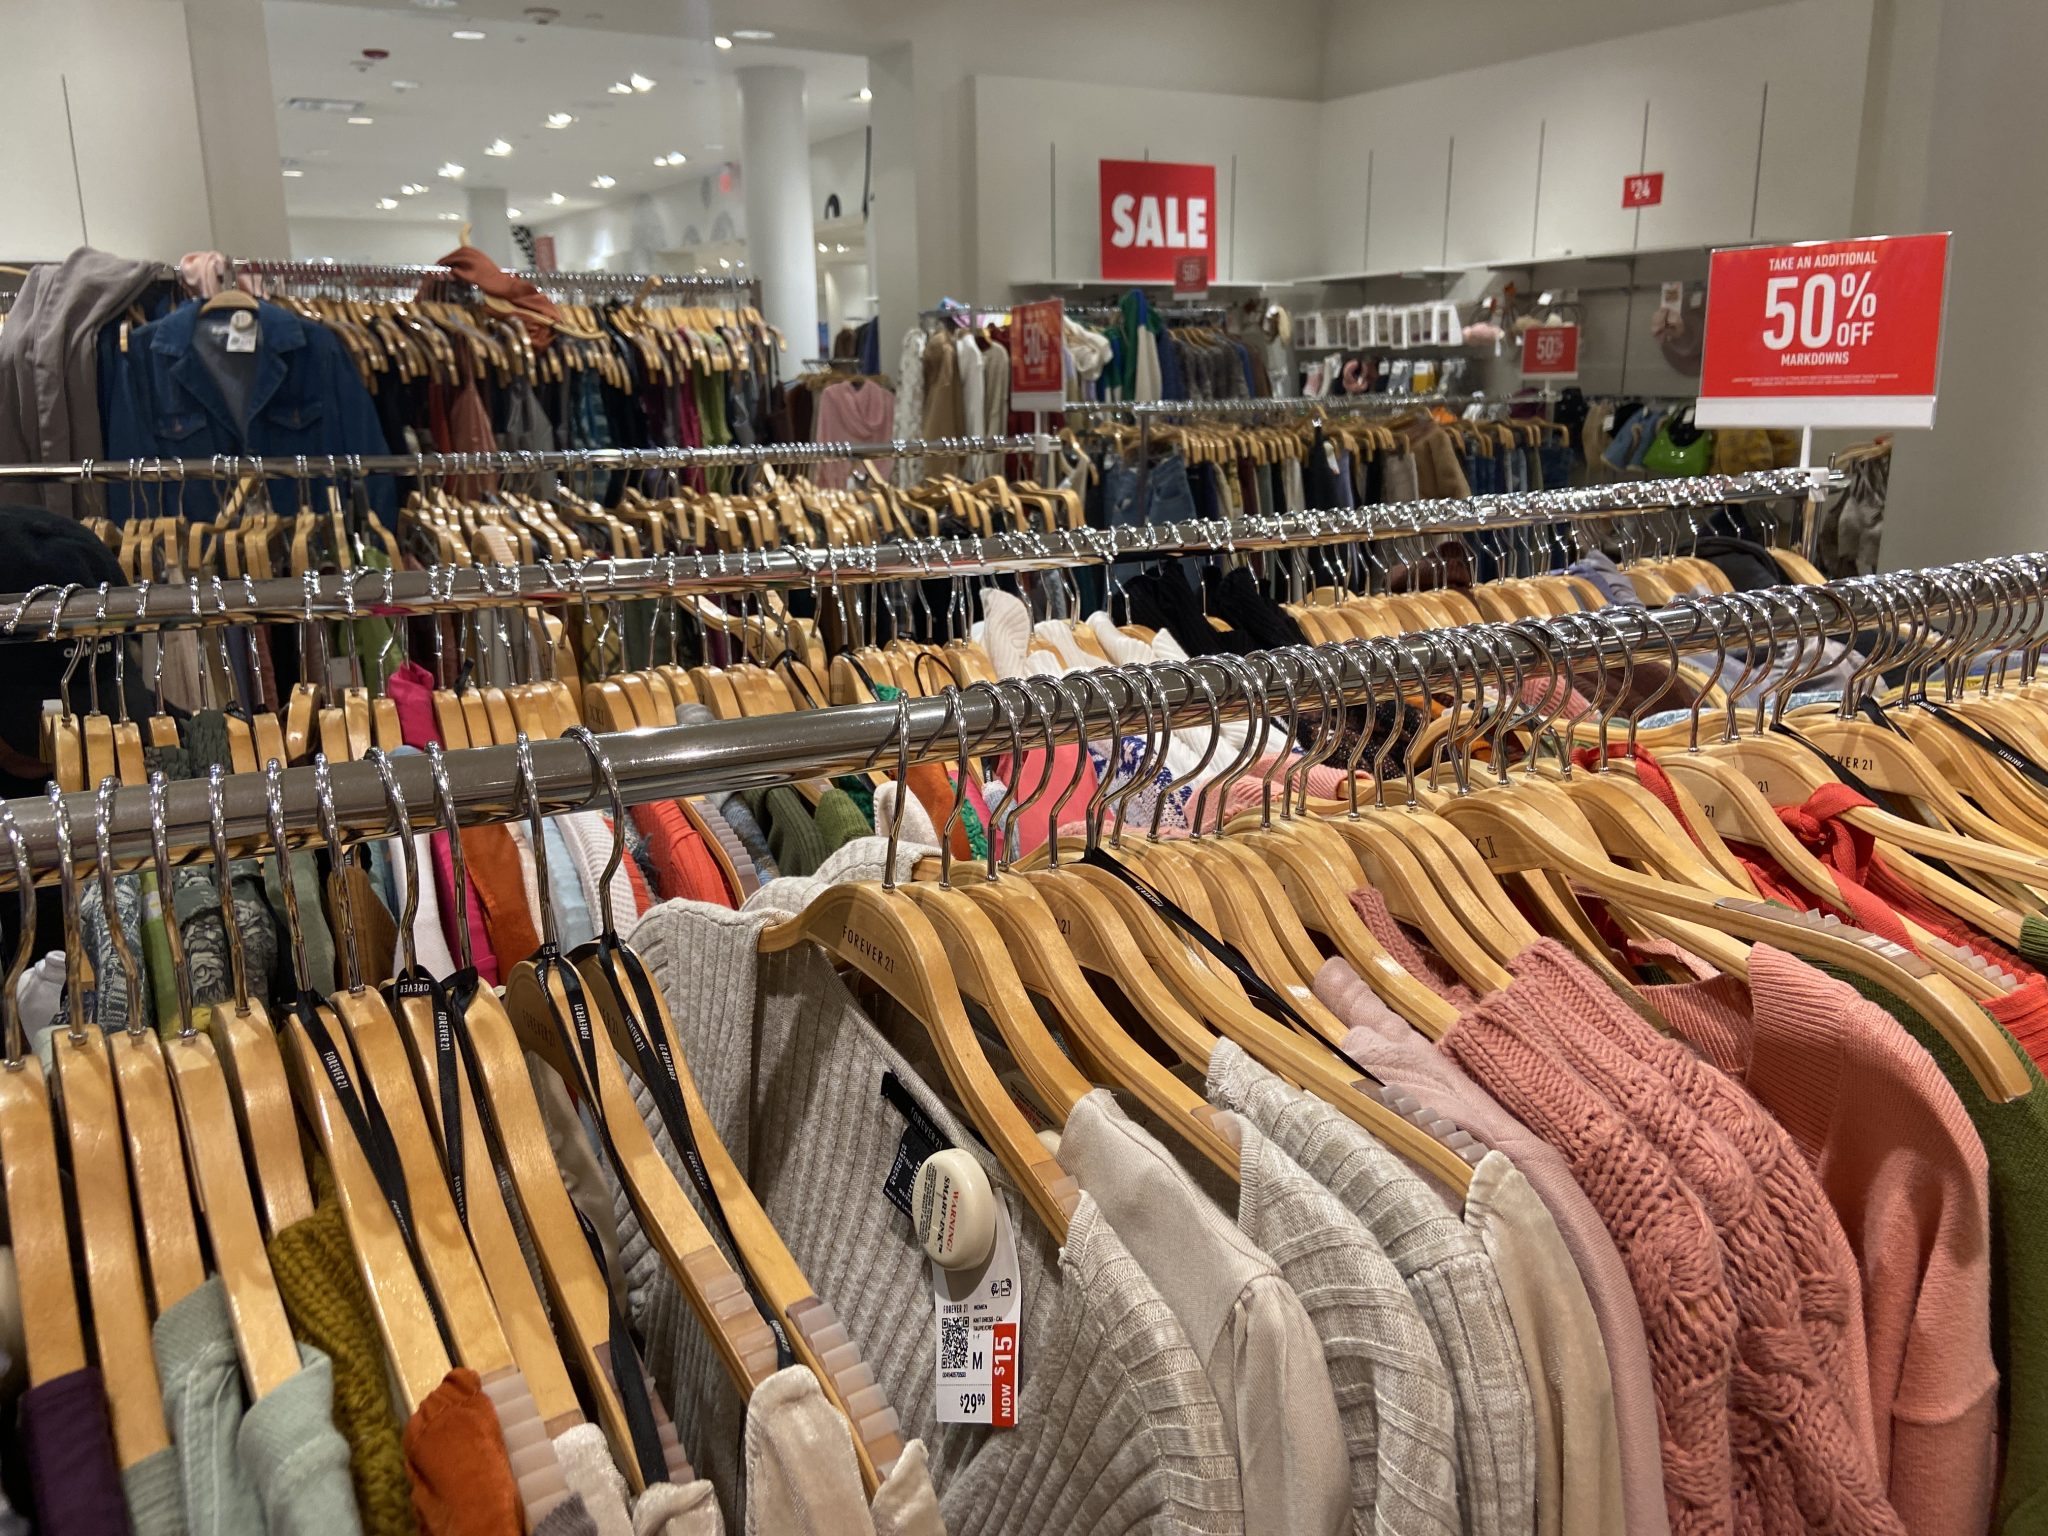 Racks of clothing on sale at Forever 21.